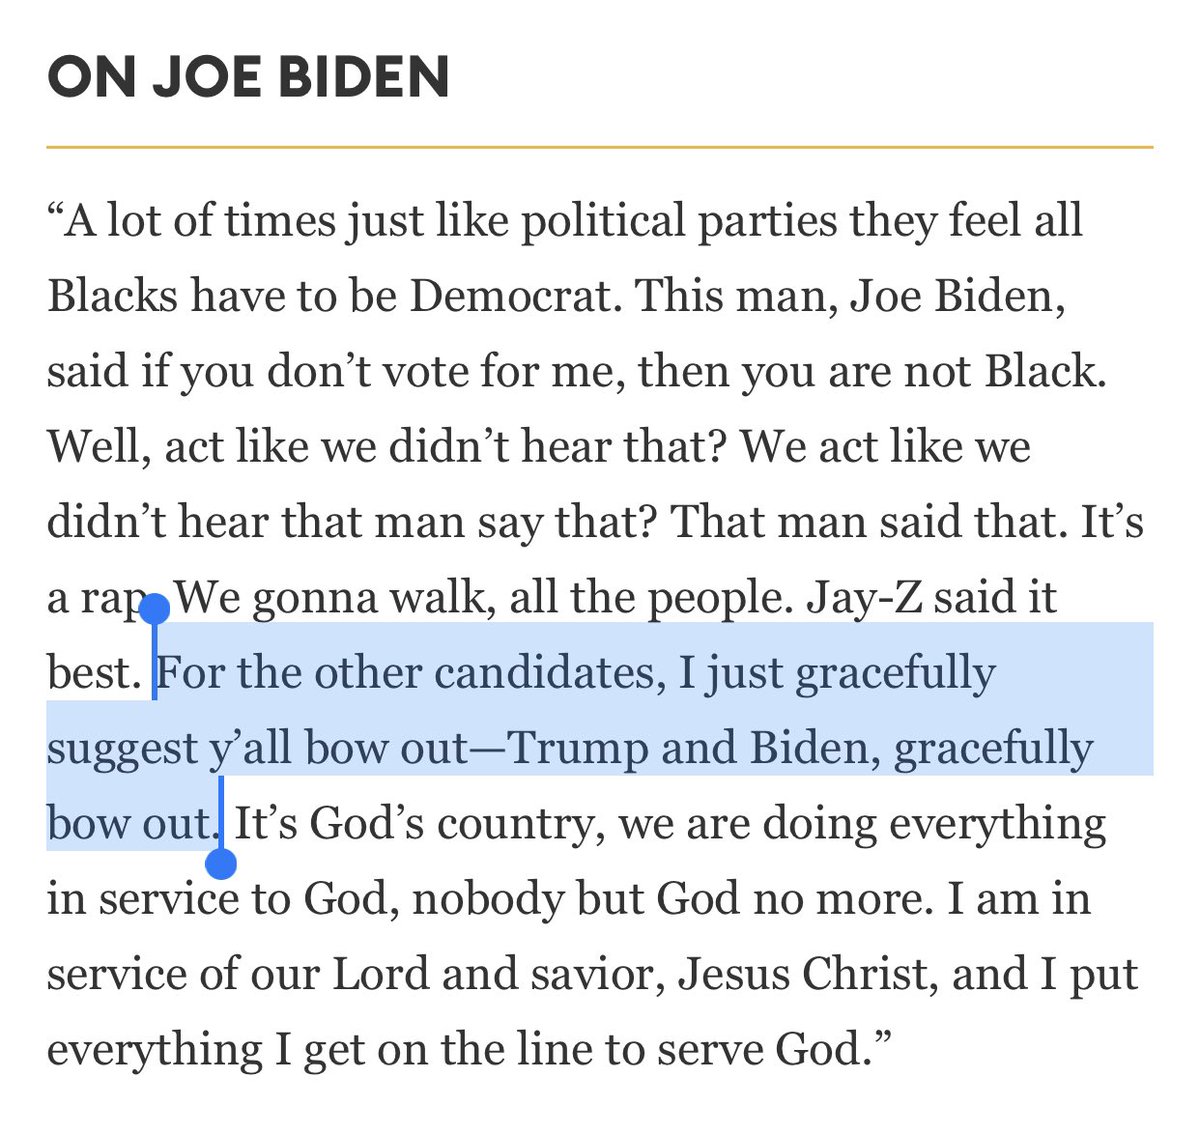 Kanye West is not a fan of Biden and believes both he and Trump should just gracefully bow out of the race.